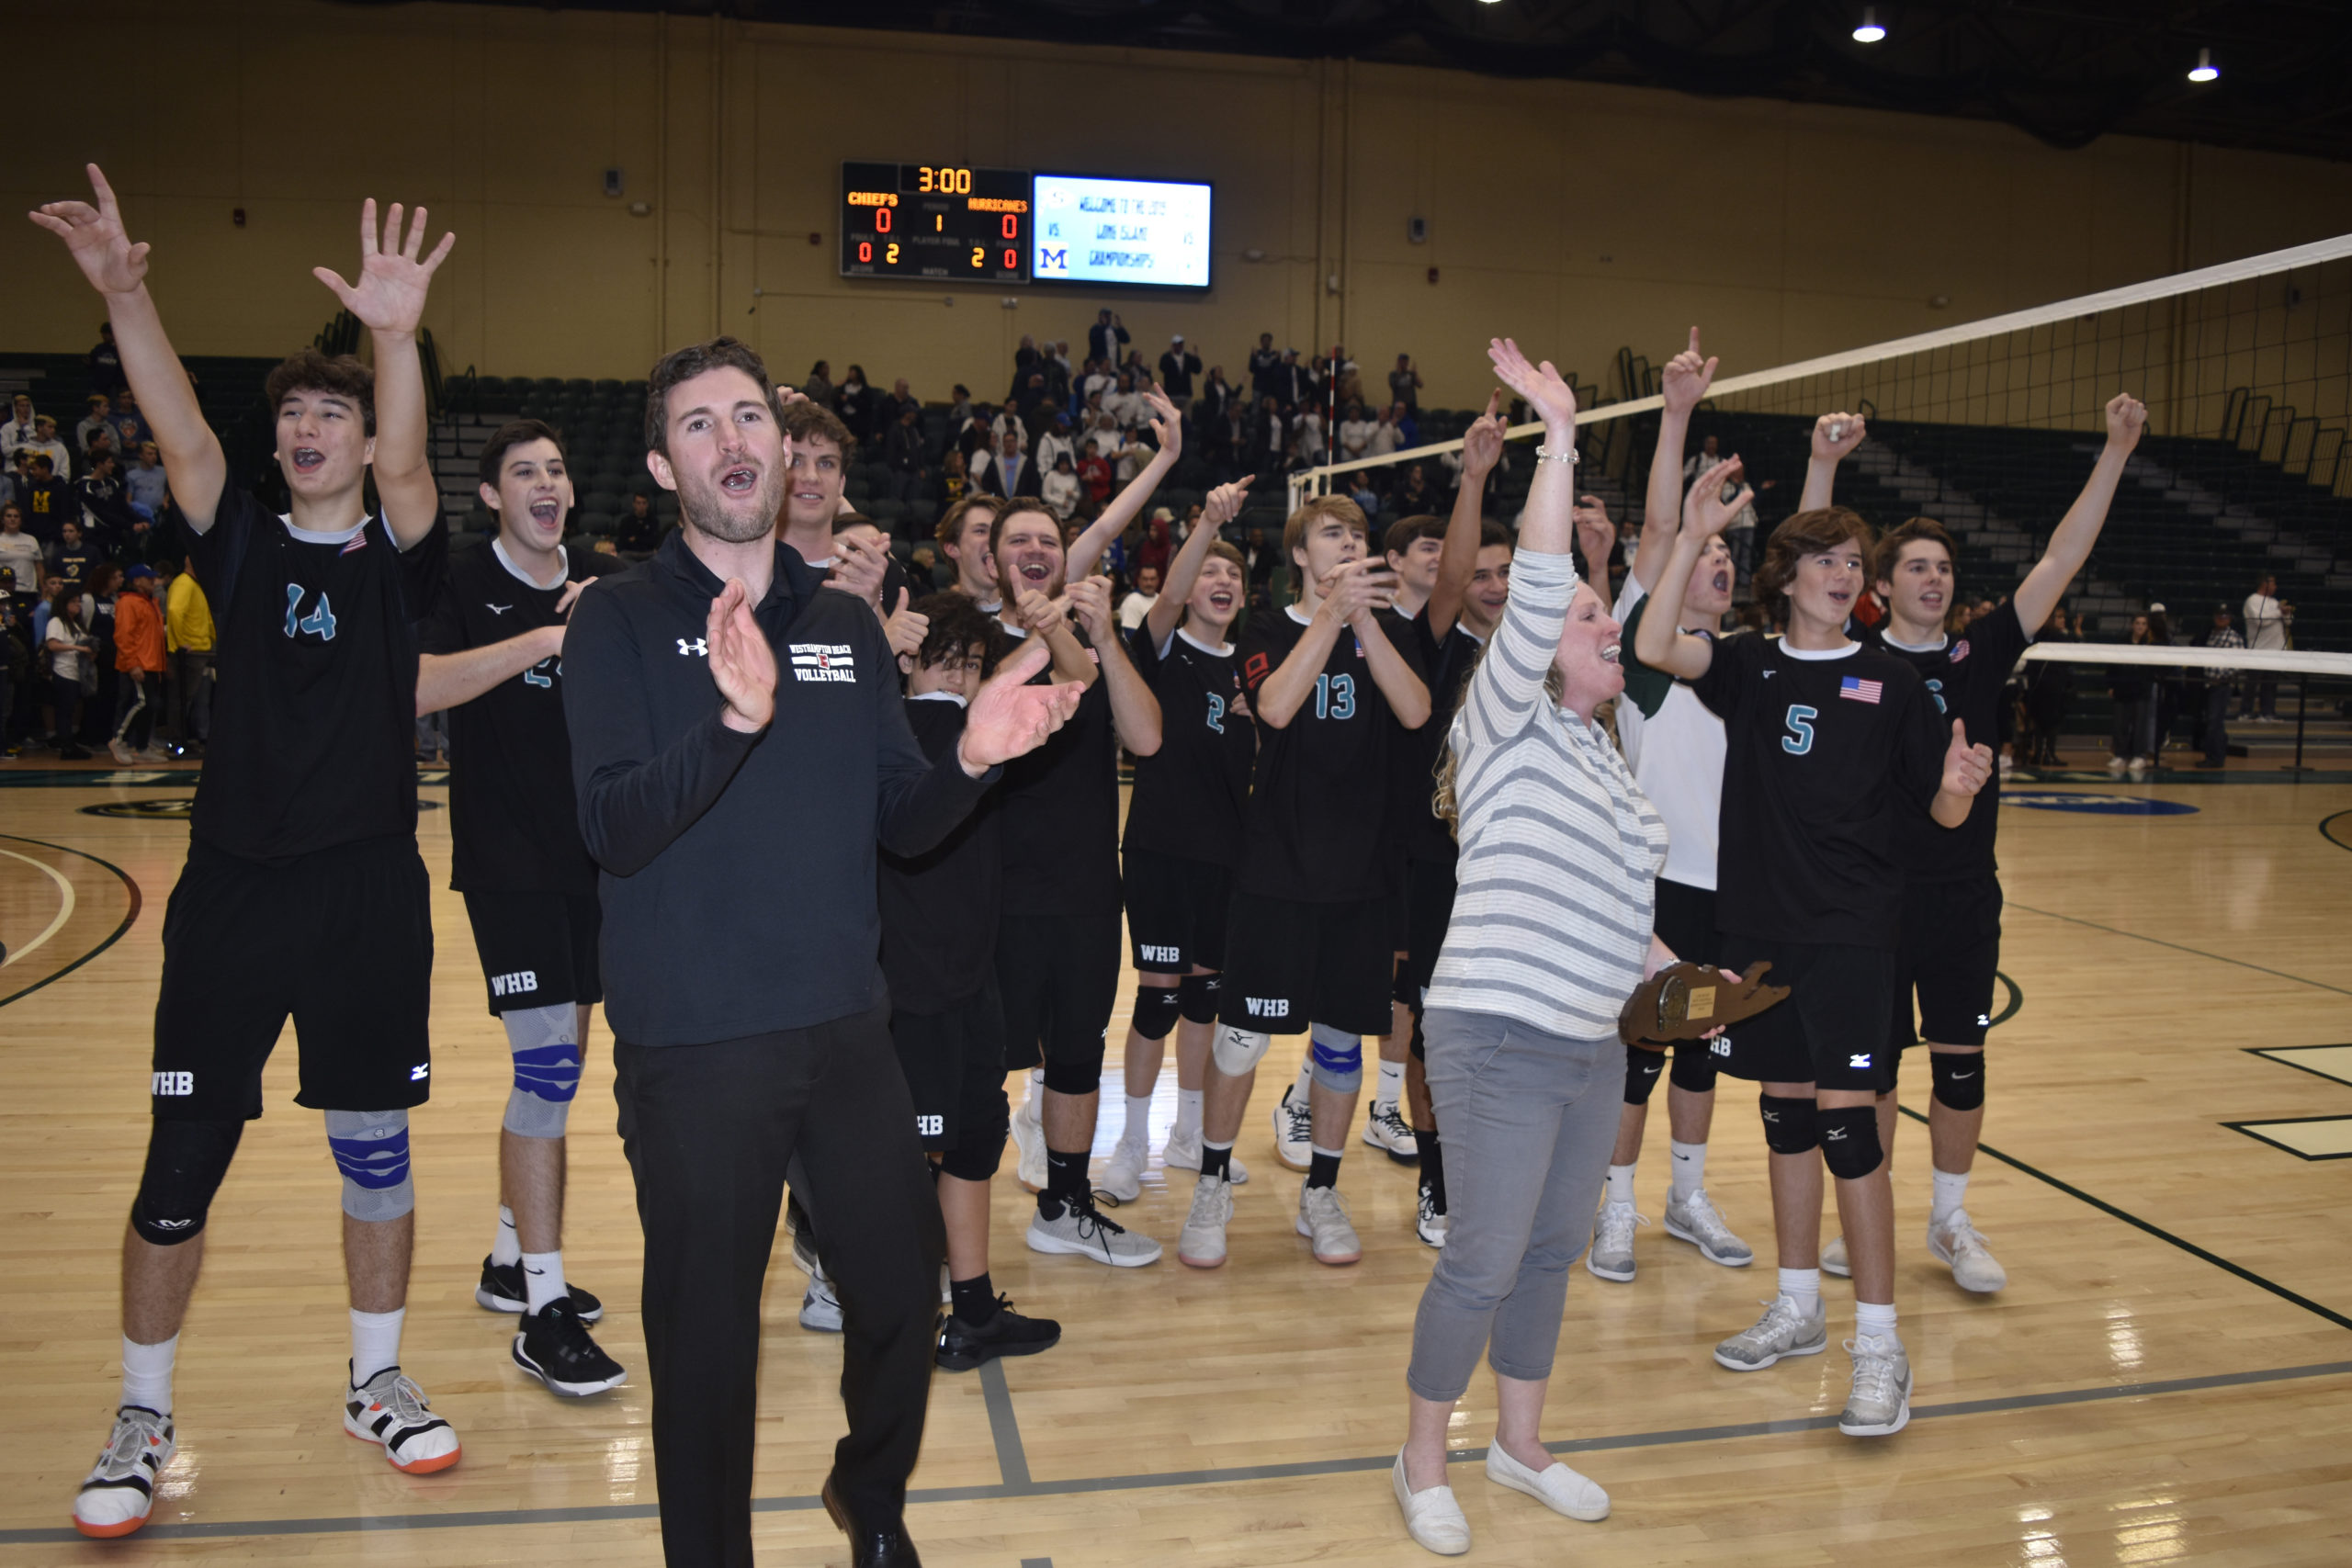 Banner Year Continues 
November 21 -- The Westhampton Beach boys volleyball team had its best season ever winning both Suffolk County and Long Island Division II Championships.